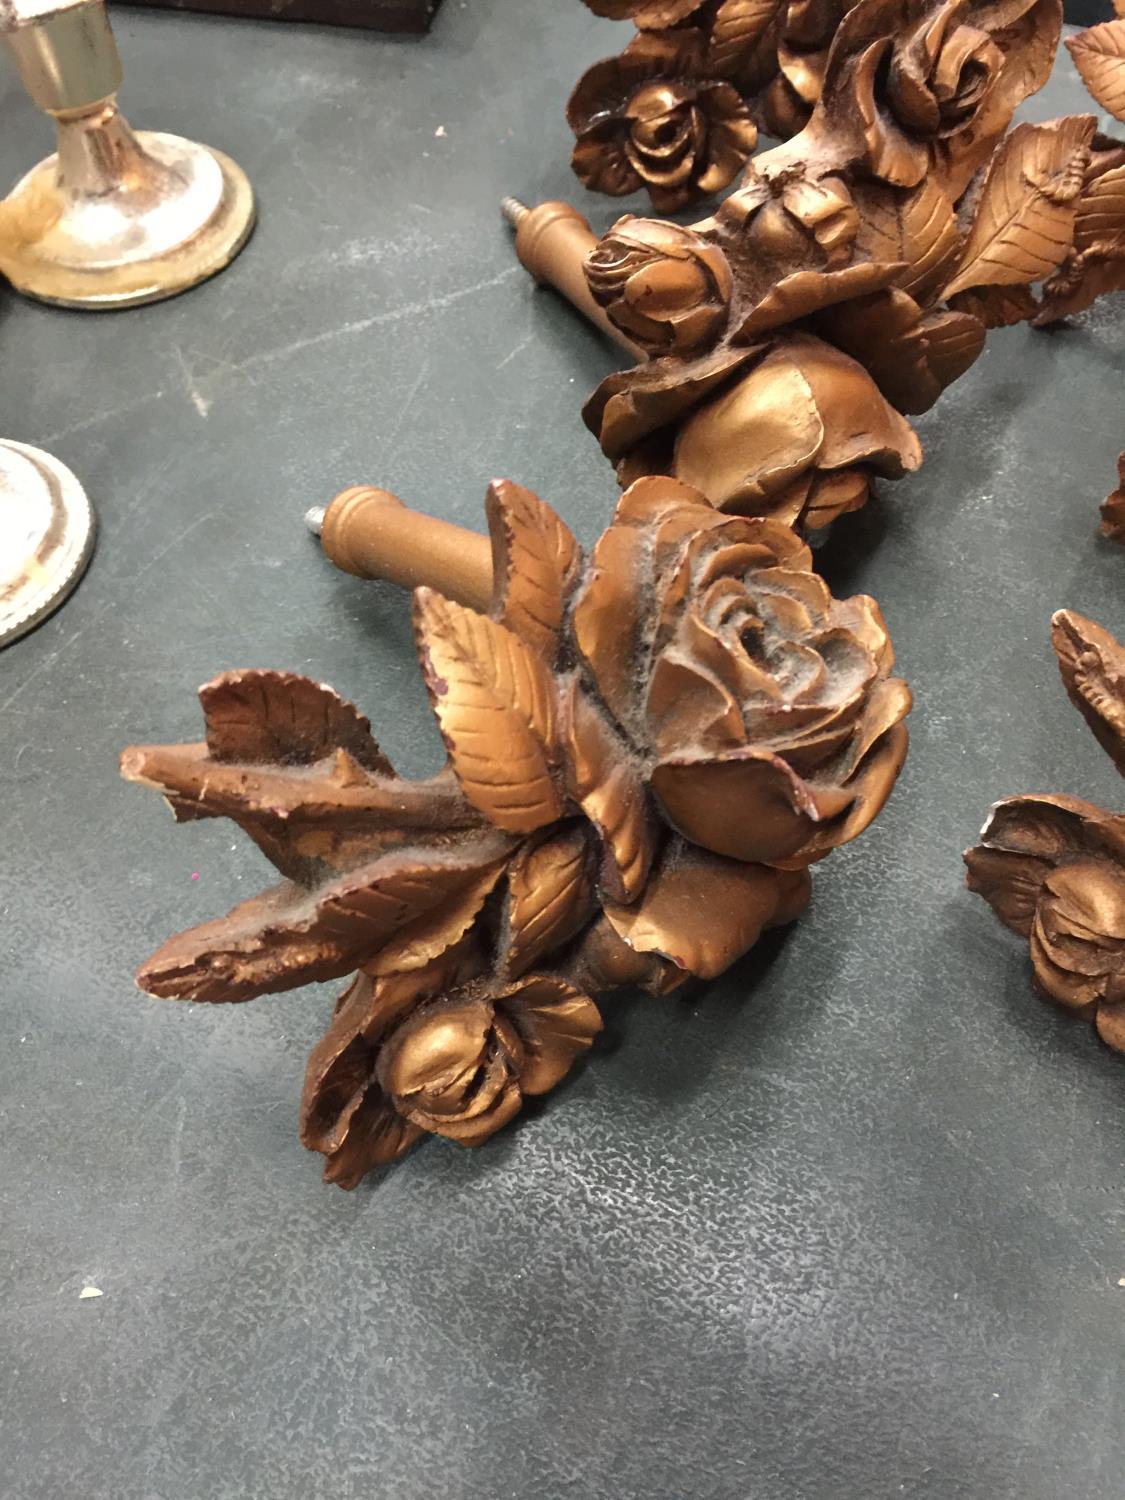 SIX CARVED WOODEN CURTAIN TIE BACKS IN THE SHAPE OF A ROSE - Image 3 of 3